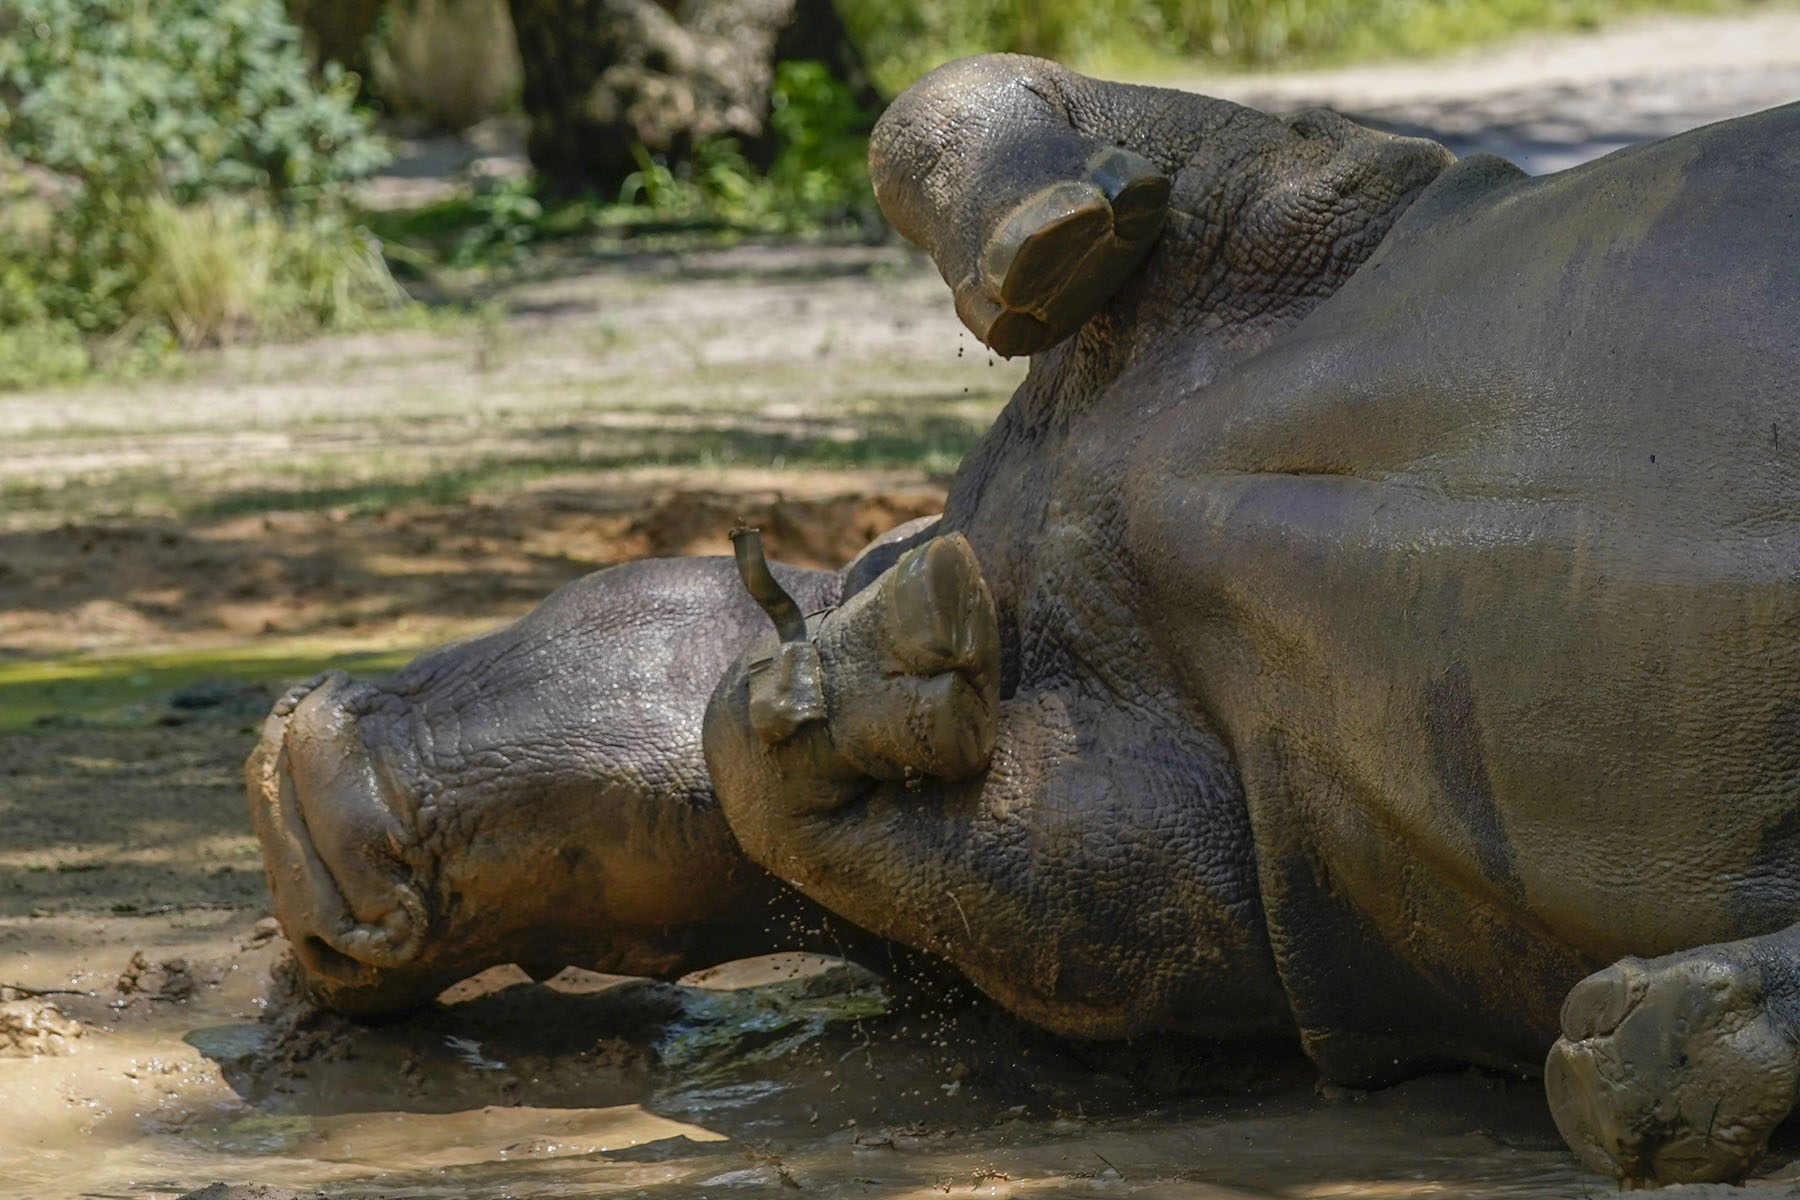 Helen, a rhino at Walt Disney World's Animal Kingdom, rolls around in a mud puddle wearing a fitness device on her right front leg, Monday, May 16, 2022, in Lake Buena Vista, Fla. The purpose of the fitness device is to gather data on the number of steps she takes each day, whether she is walking, running or napping, and which part of the man-made savanna she favors the most. (AP Photo/John Raoux)